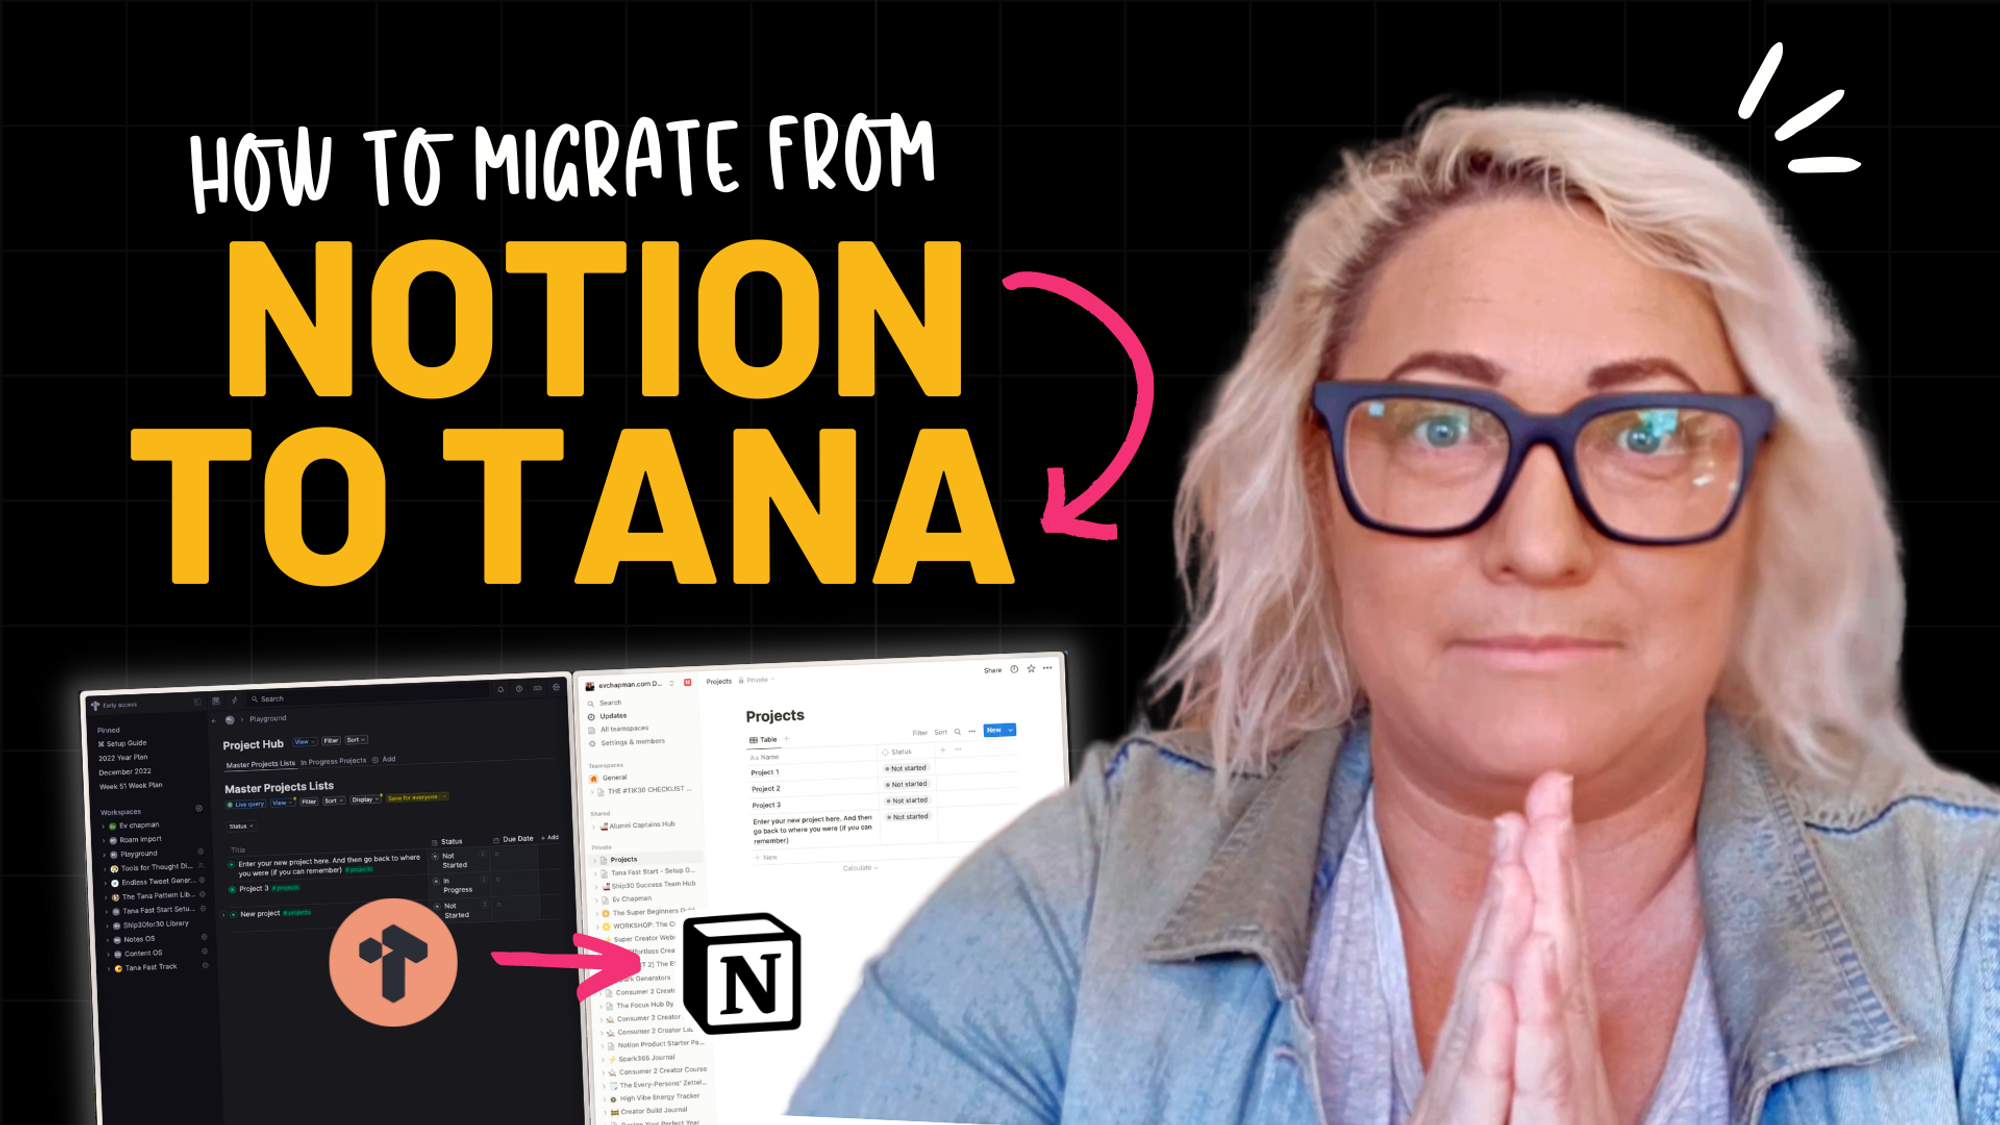 How To Migrate From Notion To Tana